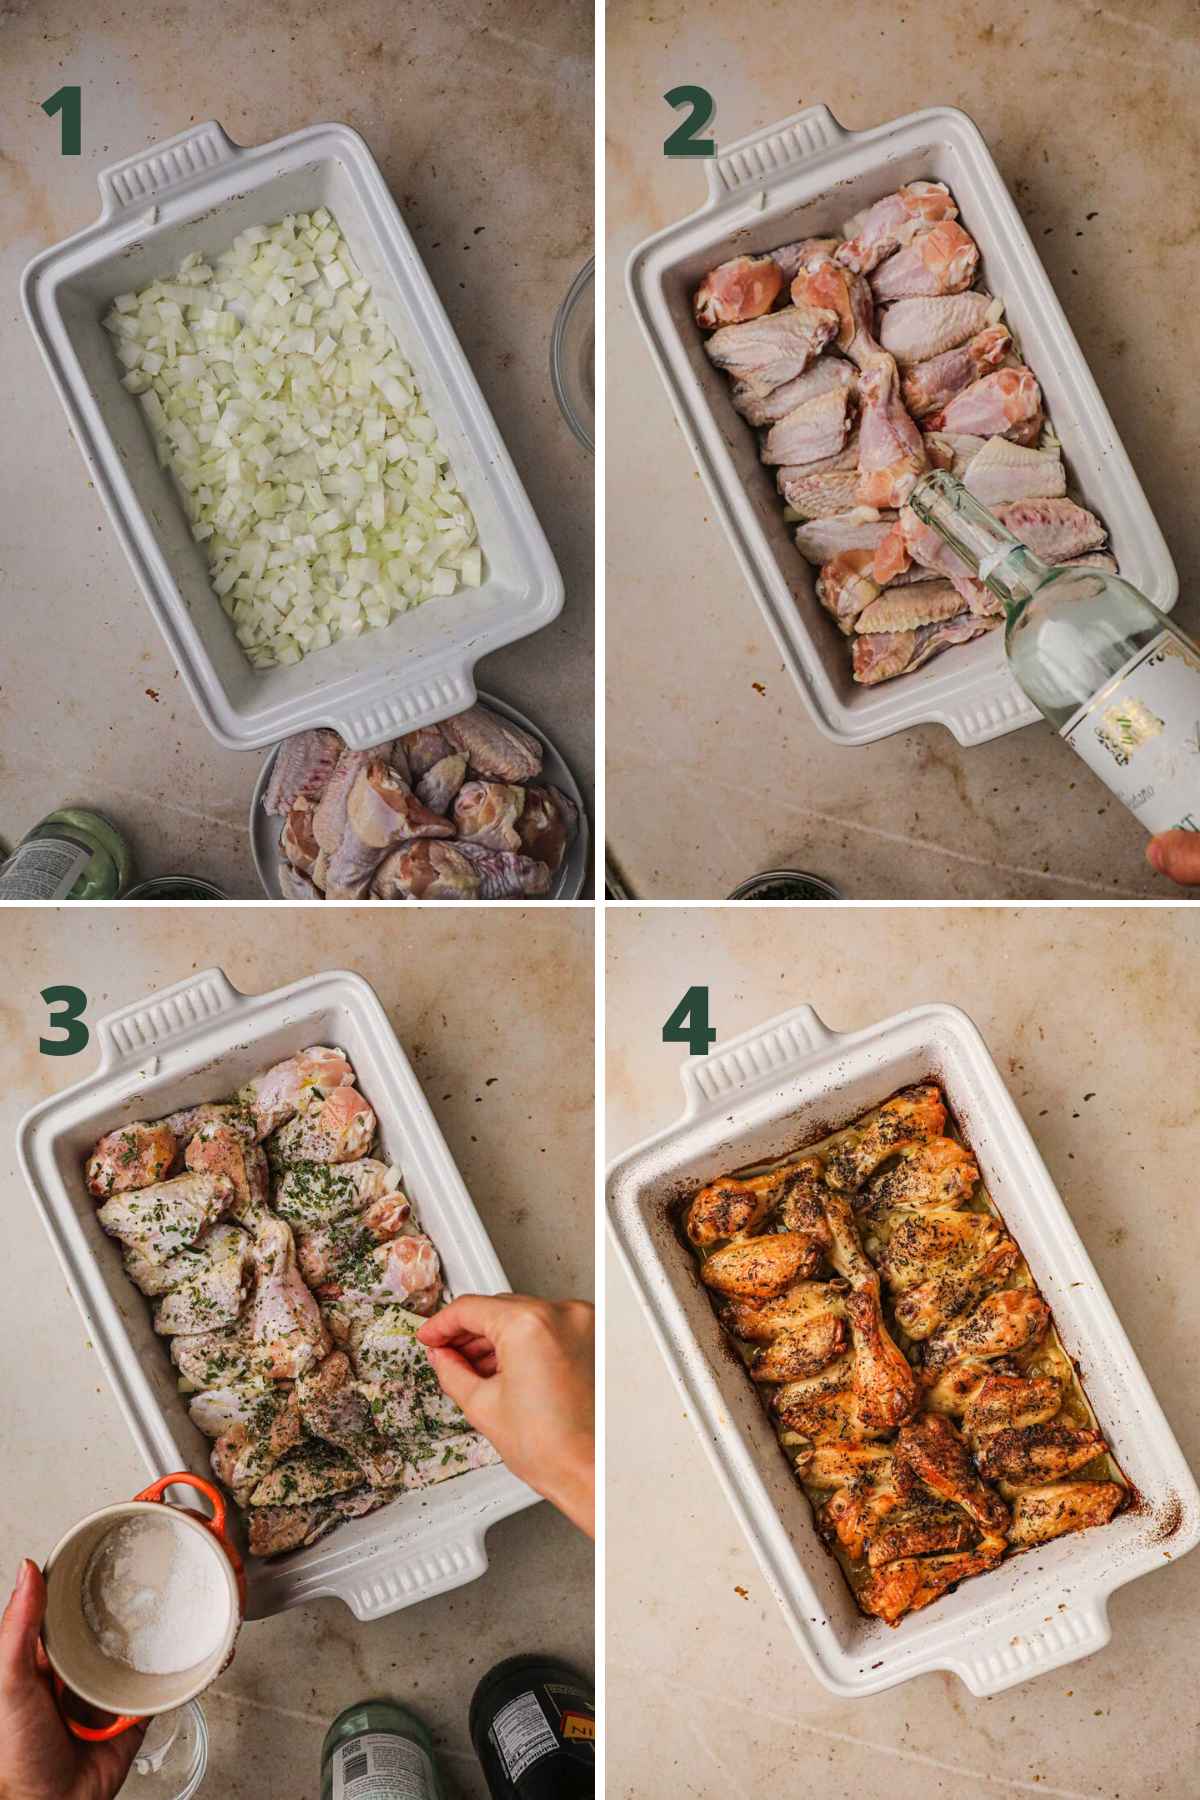 Steps to make Italian rosemary chicken wings, layer onion and wings; drizzle olive oil and wine; top with rosemary, salt, black pepper; bake until golden.